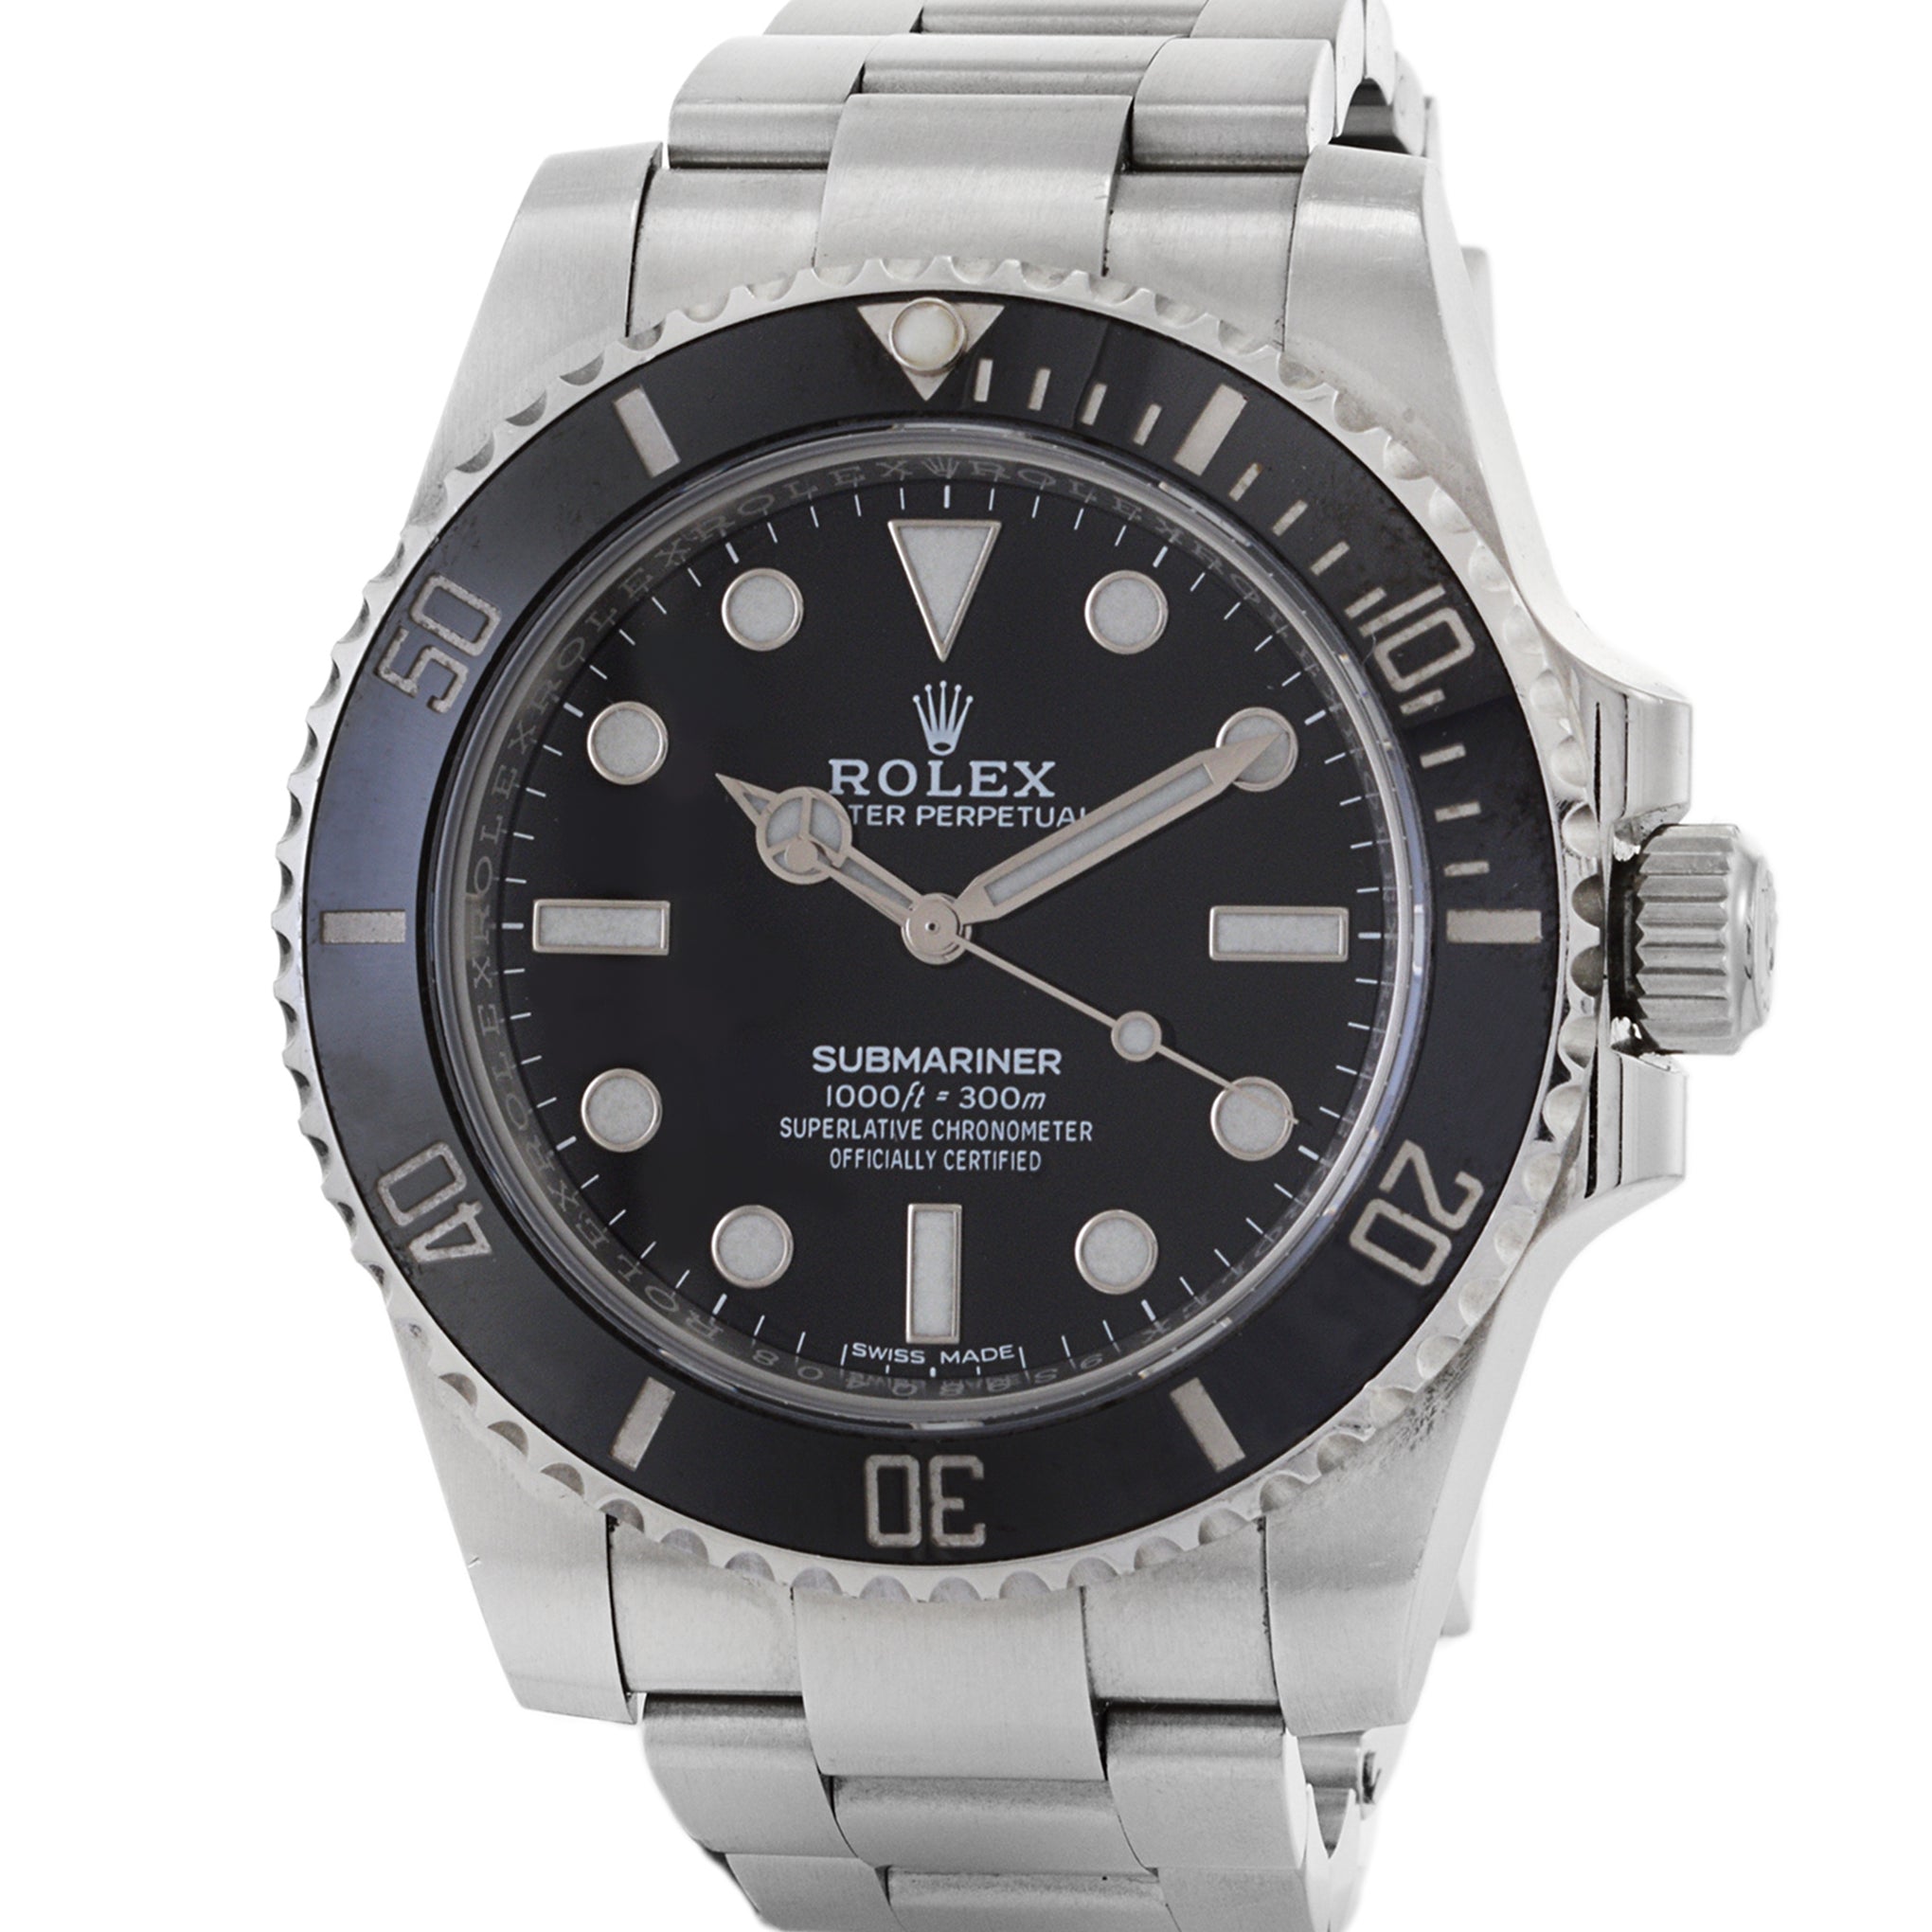 Rolex Submariner Reference 114060